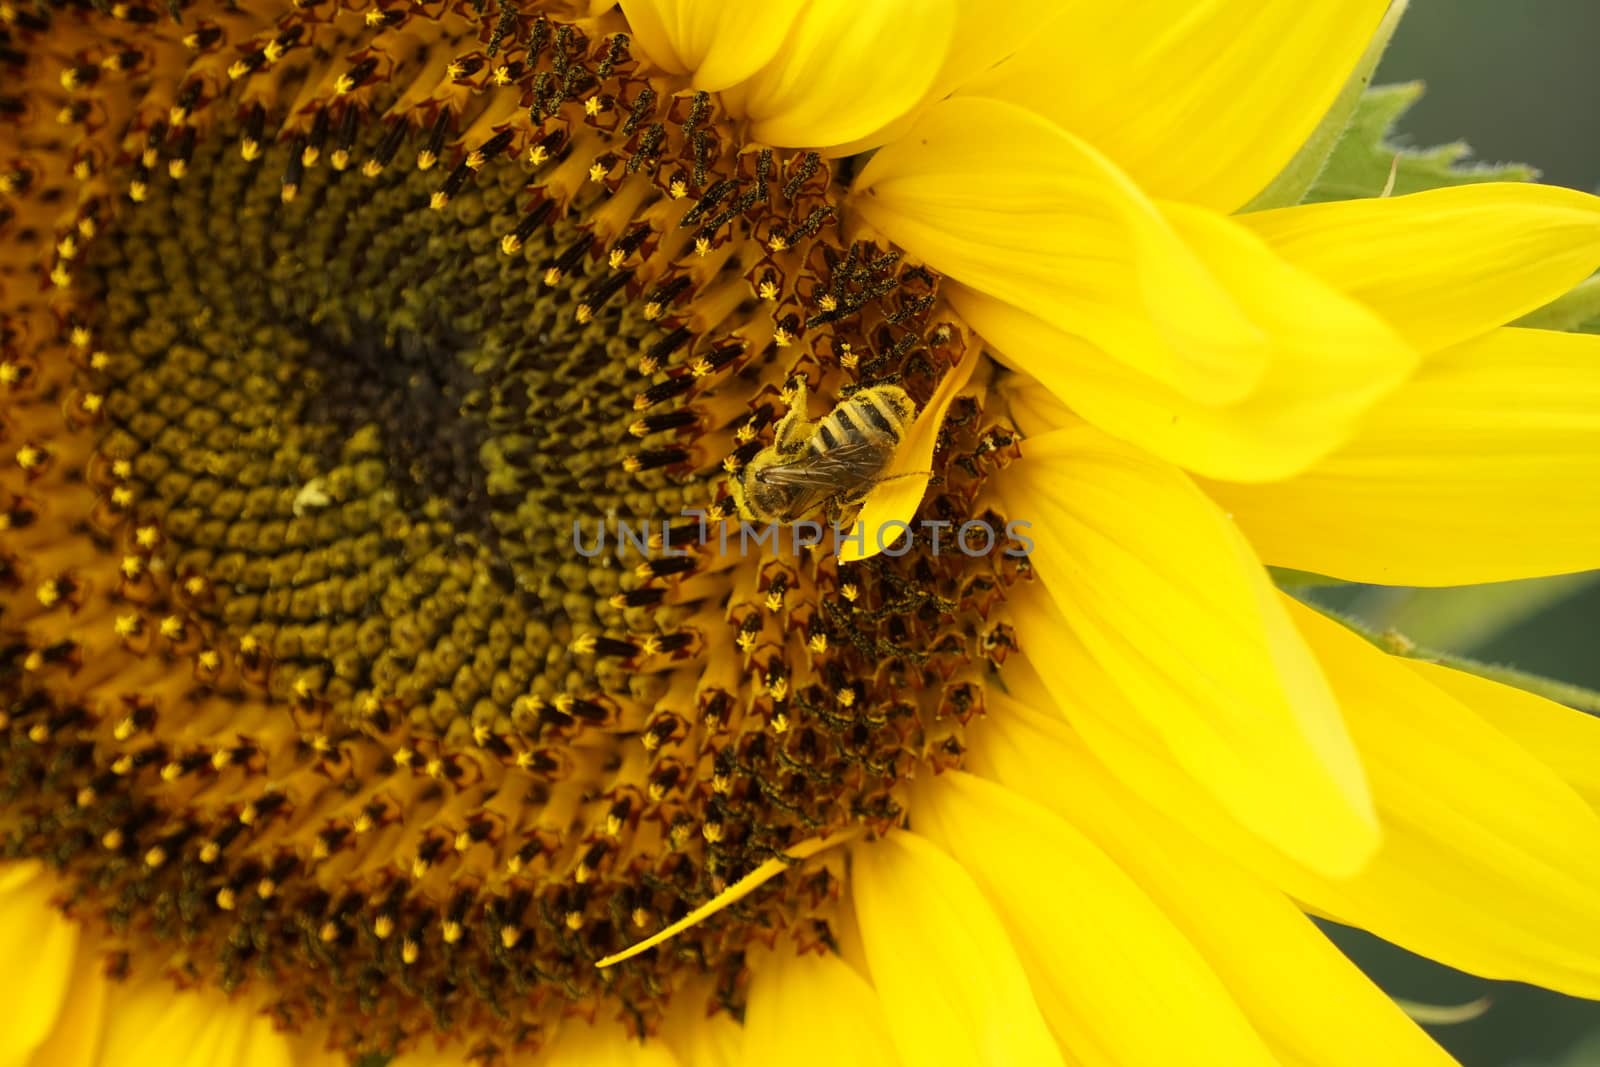 A beautiful honey bee collecting pollen in a sunflower blossom